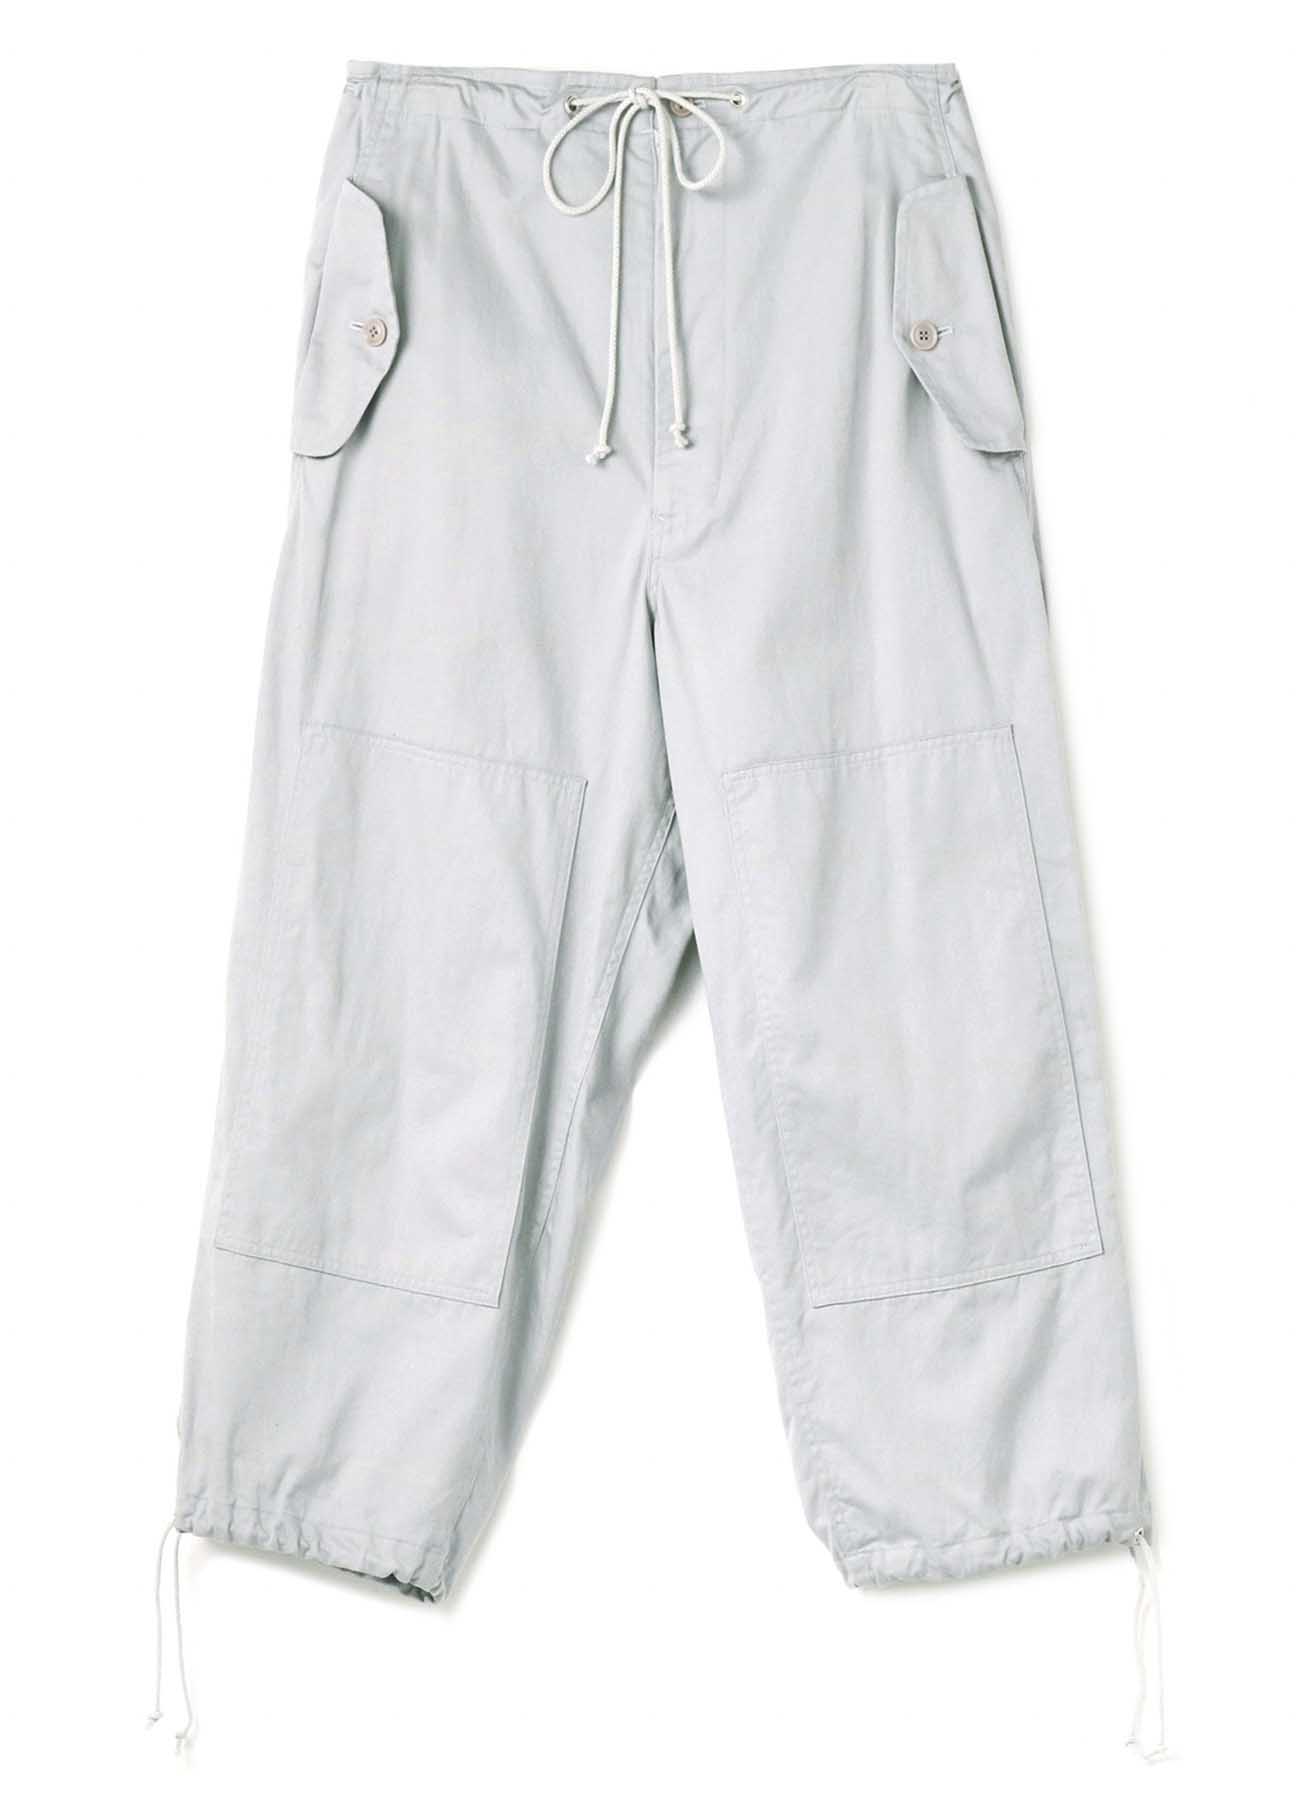 [Y's BORN PRODUCT]COTTON TWILL 4 POCKET PANTS